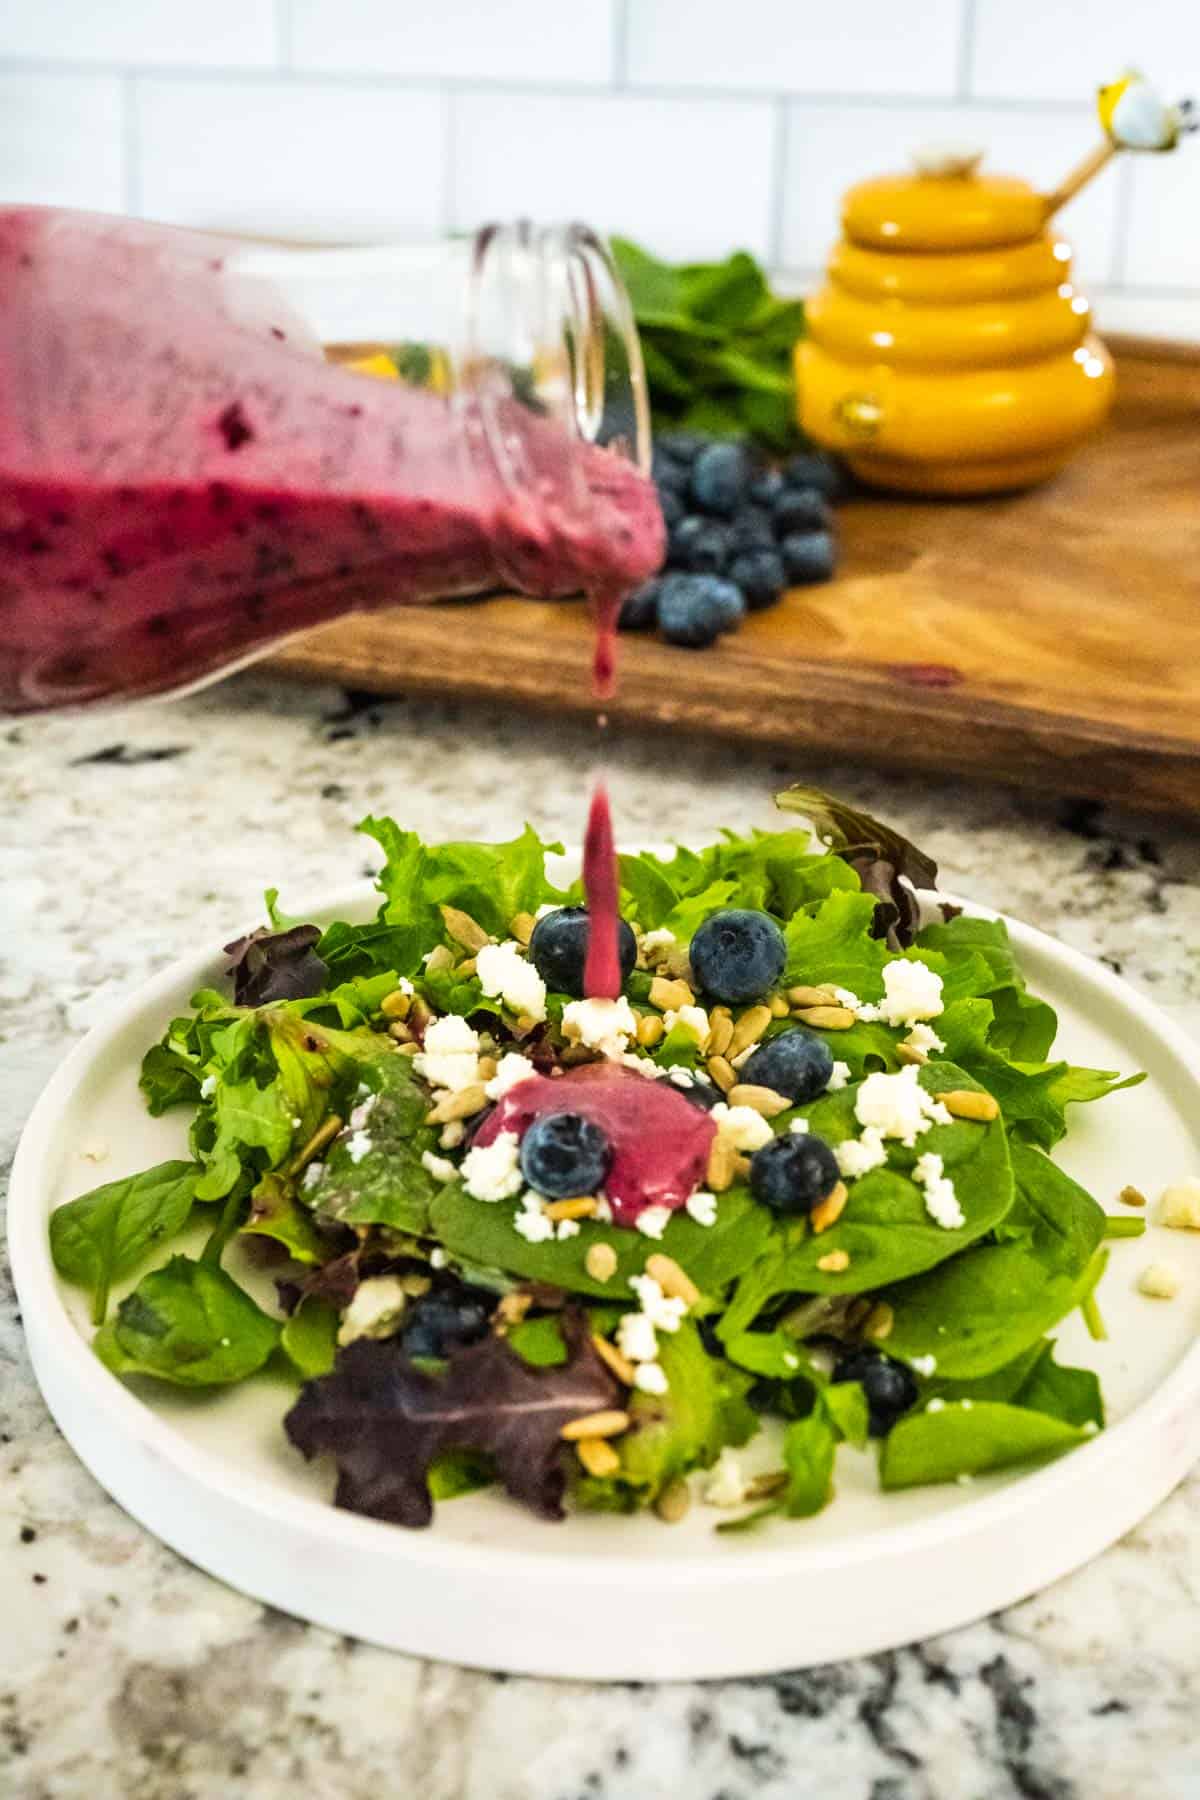 Pouring blueberry vinaigrette dressing onto a salad of fresh blueberries, feta, sunflower seeds, and spring greens.